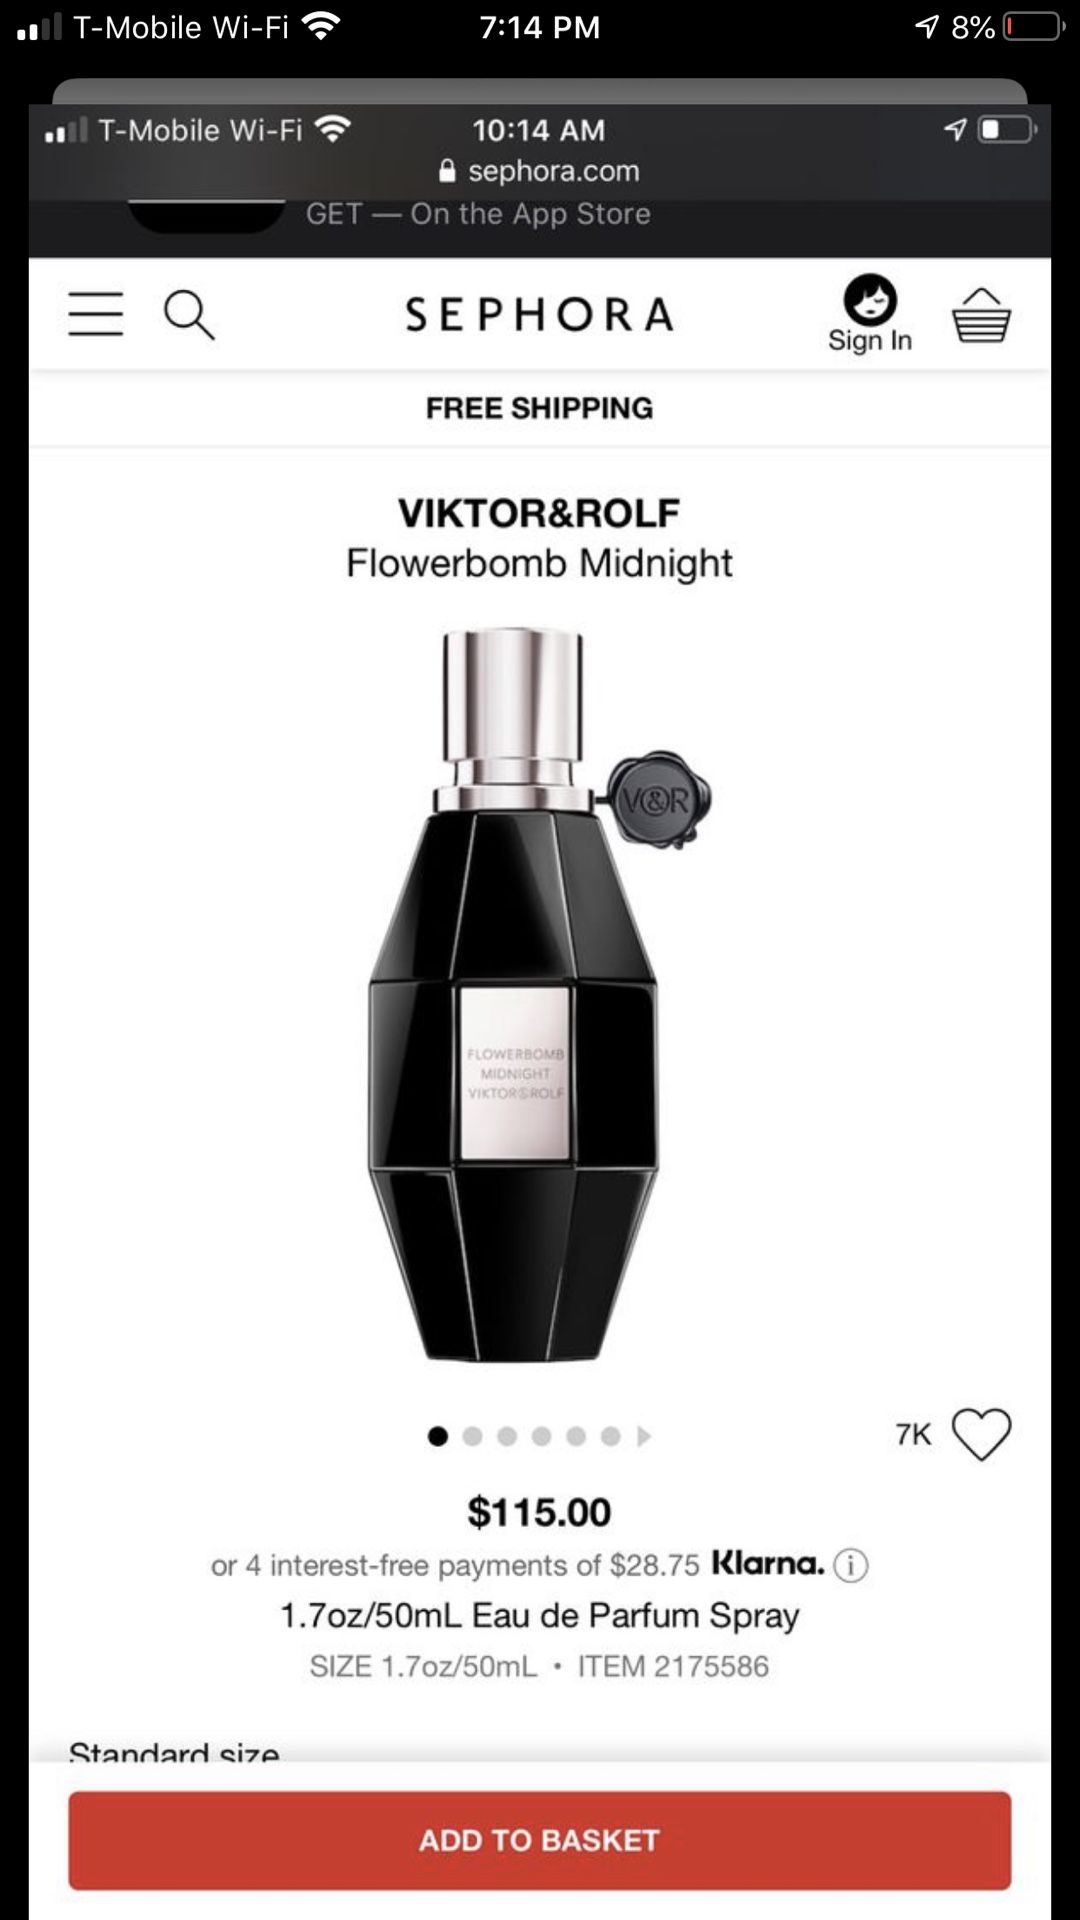 Flowerbomb midnight sealed located in kendall $100